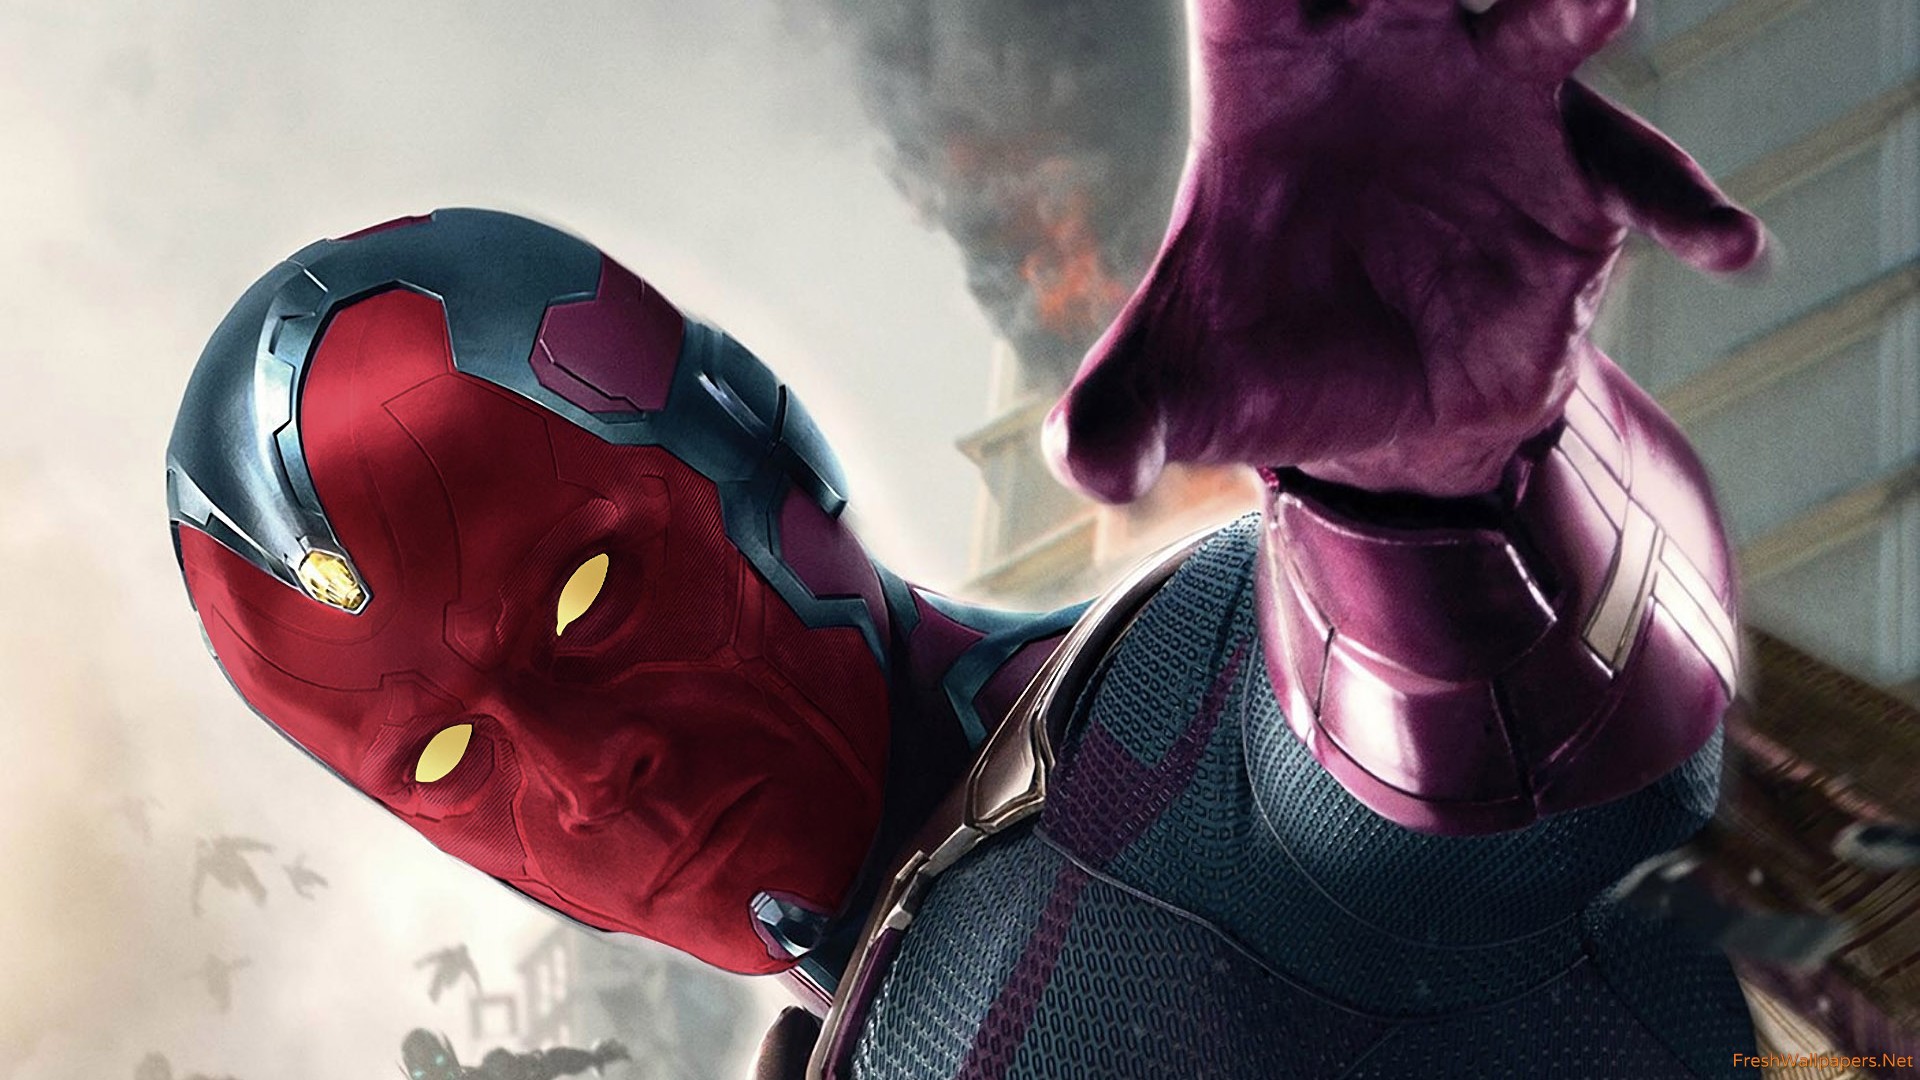 The Vision In Avengers Age Of Ultron Wallpaper Freshwallpaper